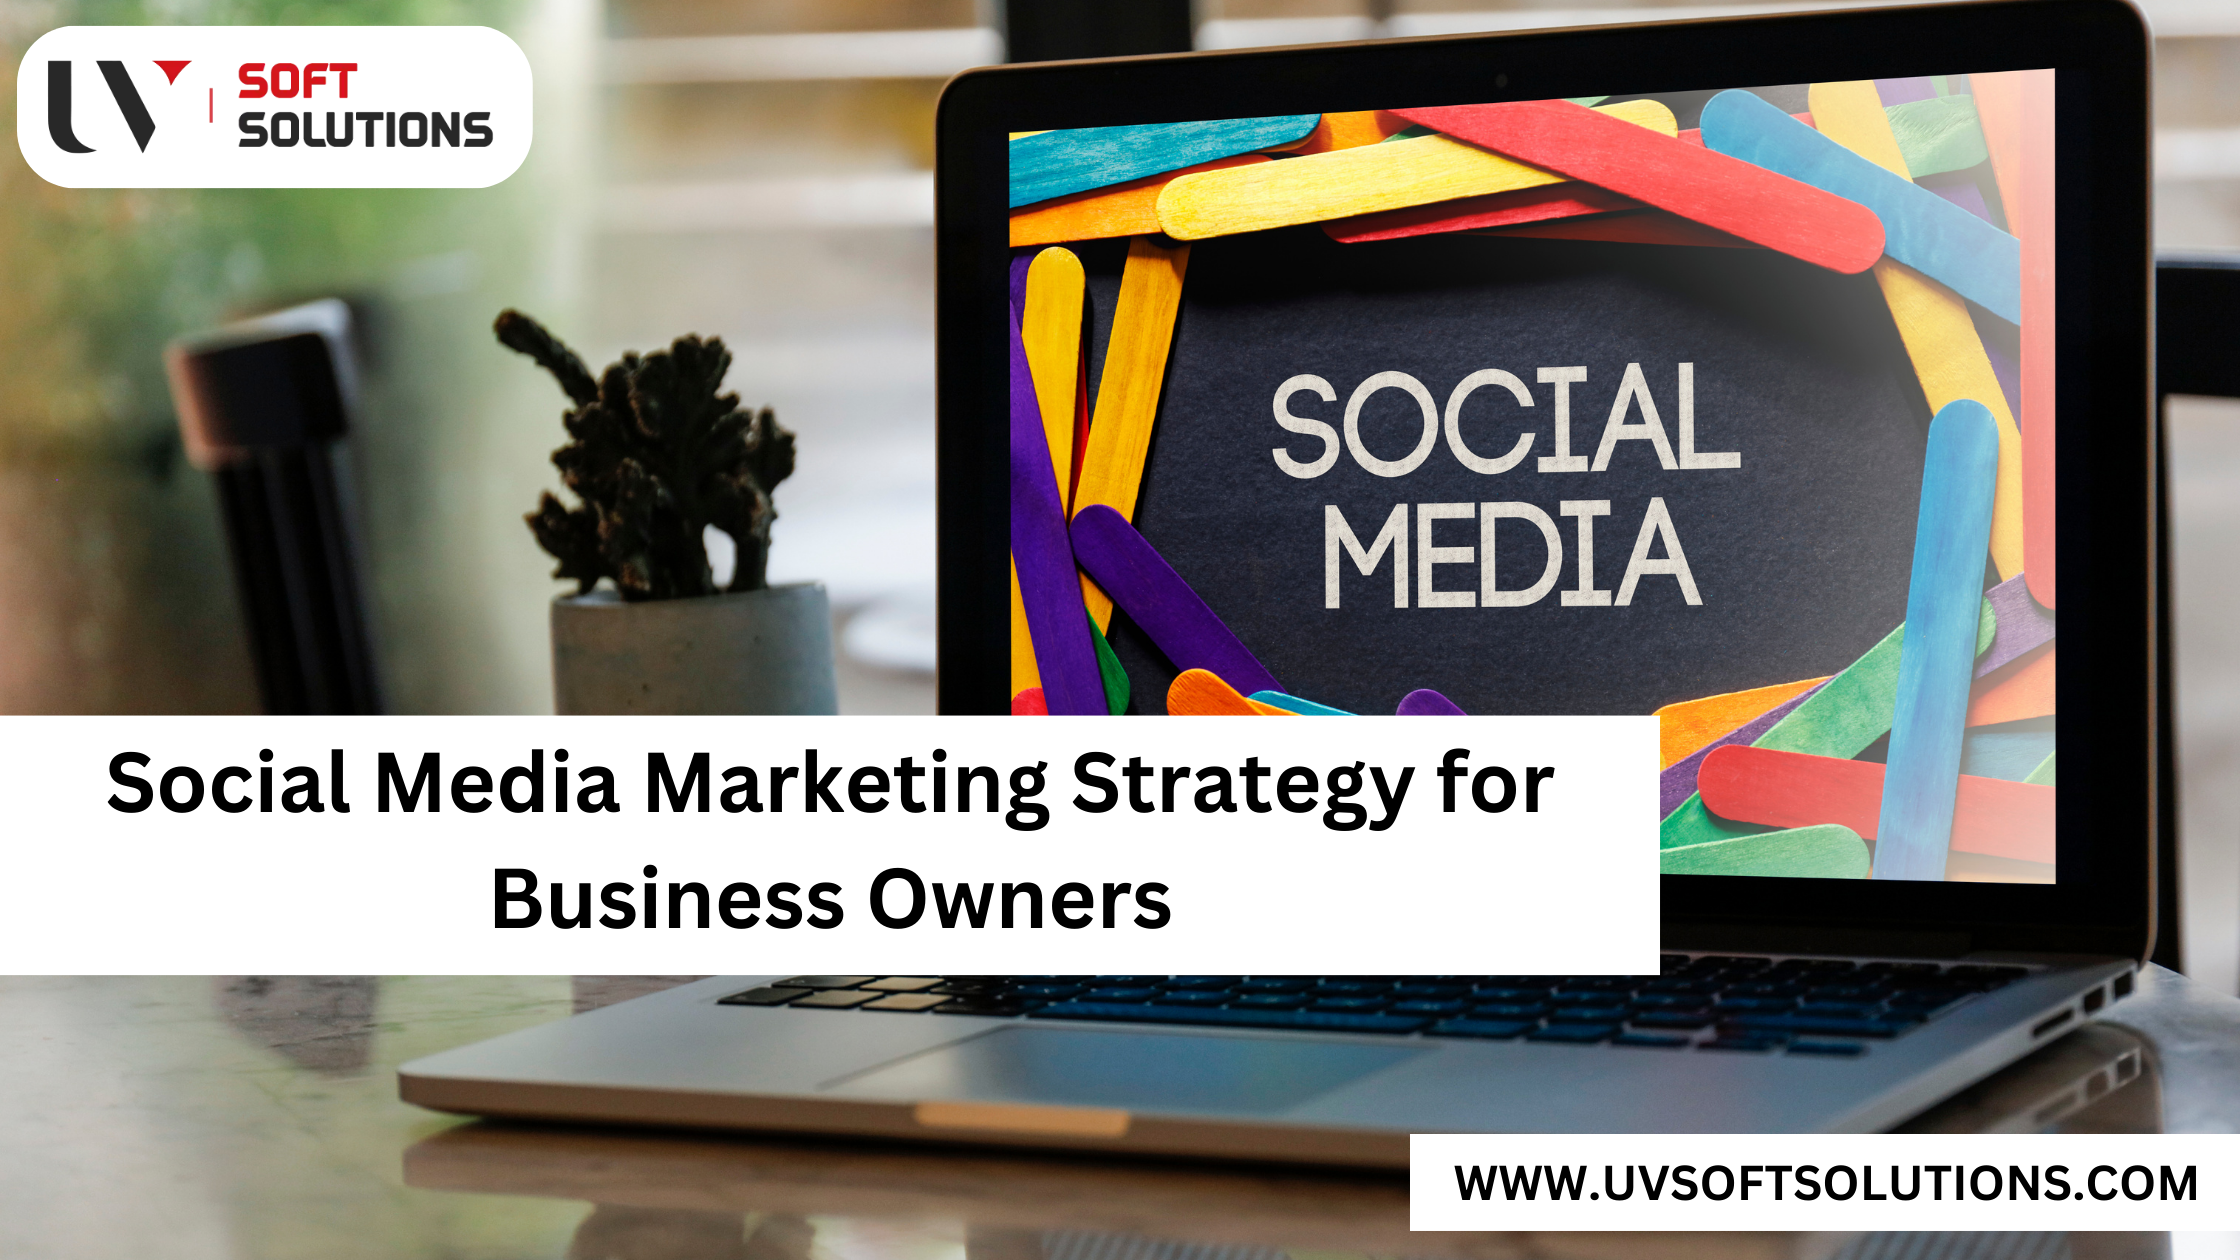 Social Media Marketing Strategy for Business Owners